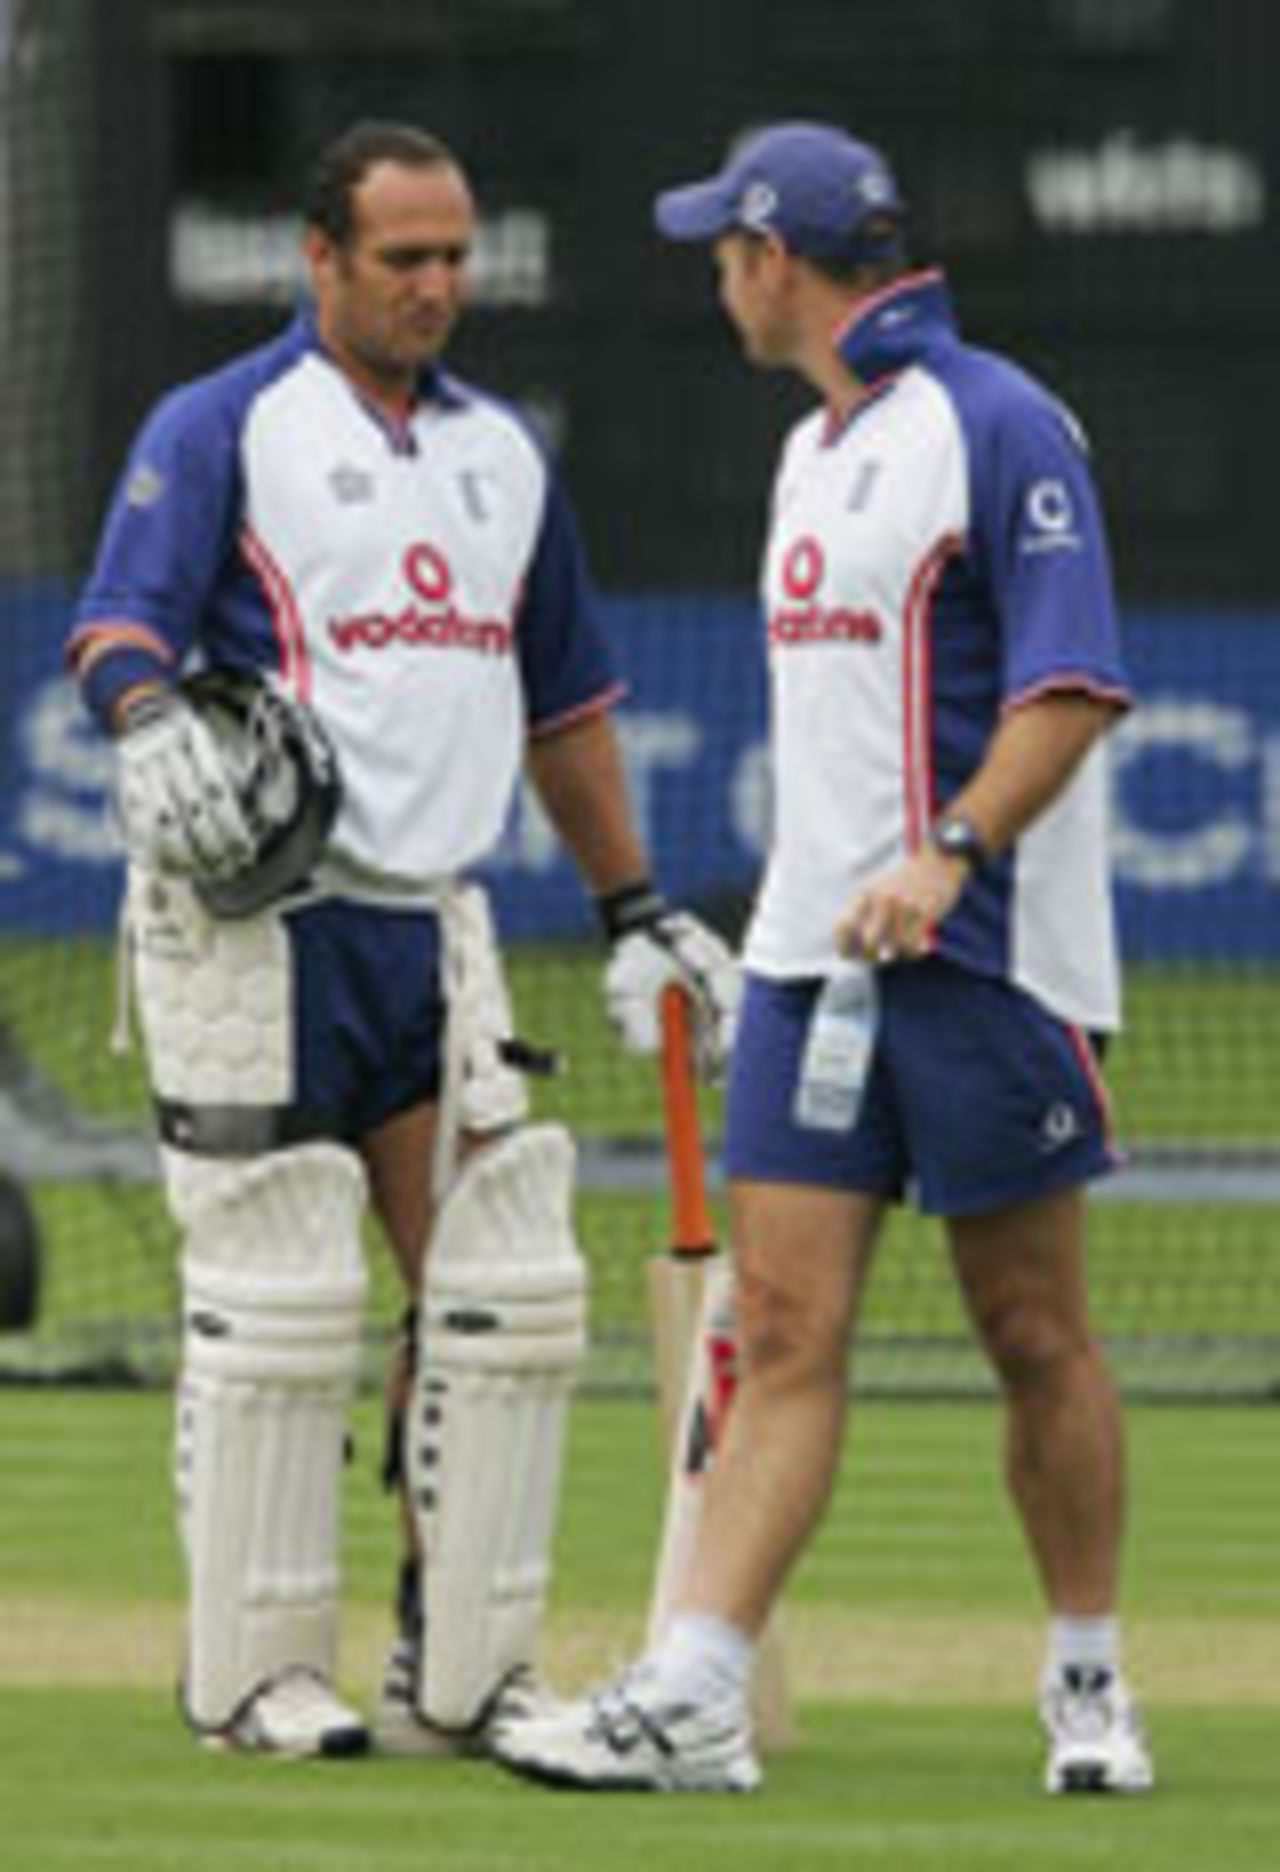 A weary looking Mark Butcher in the nets, Lord's, July 21, 2004